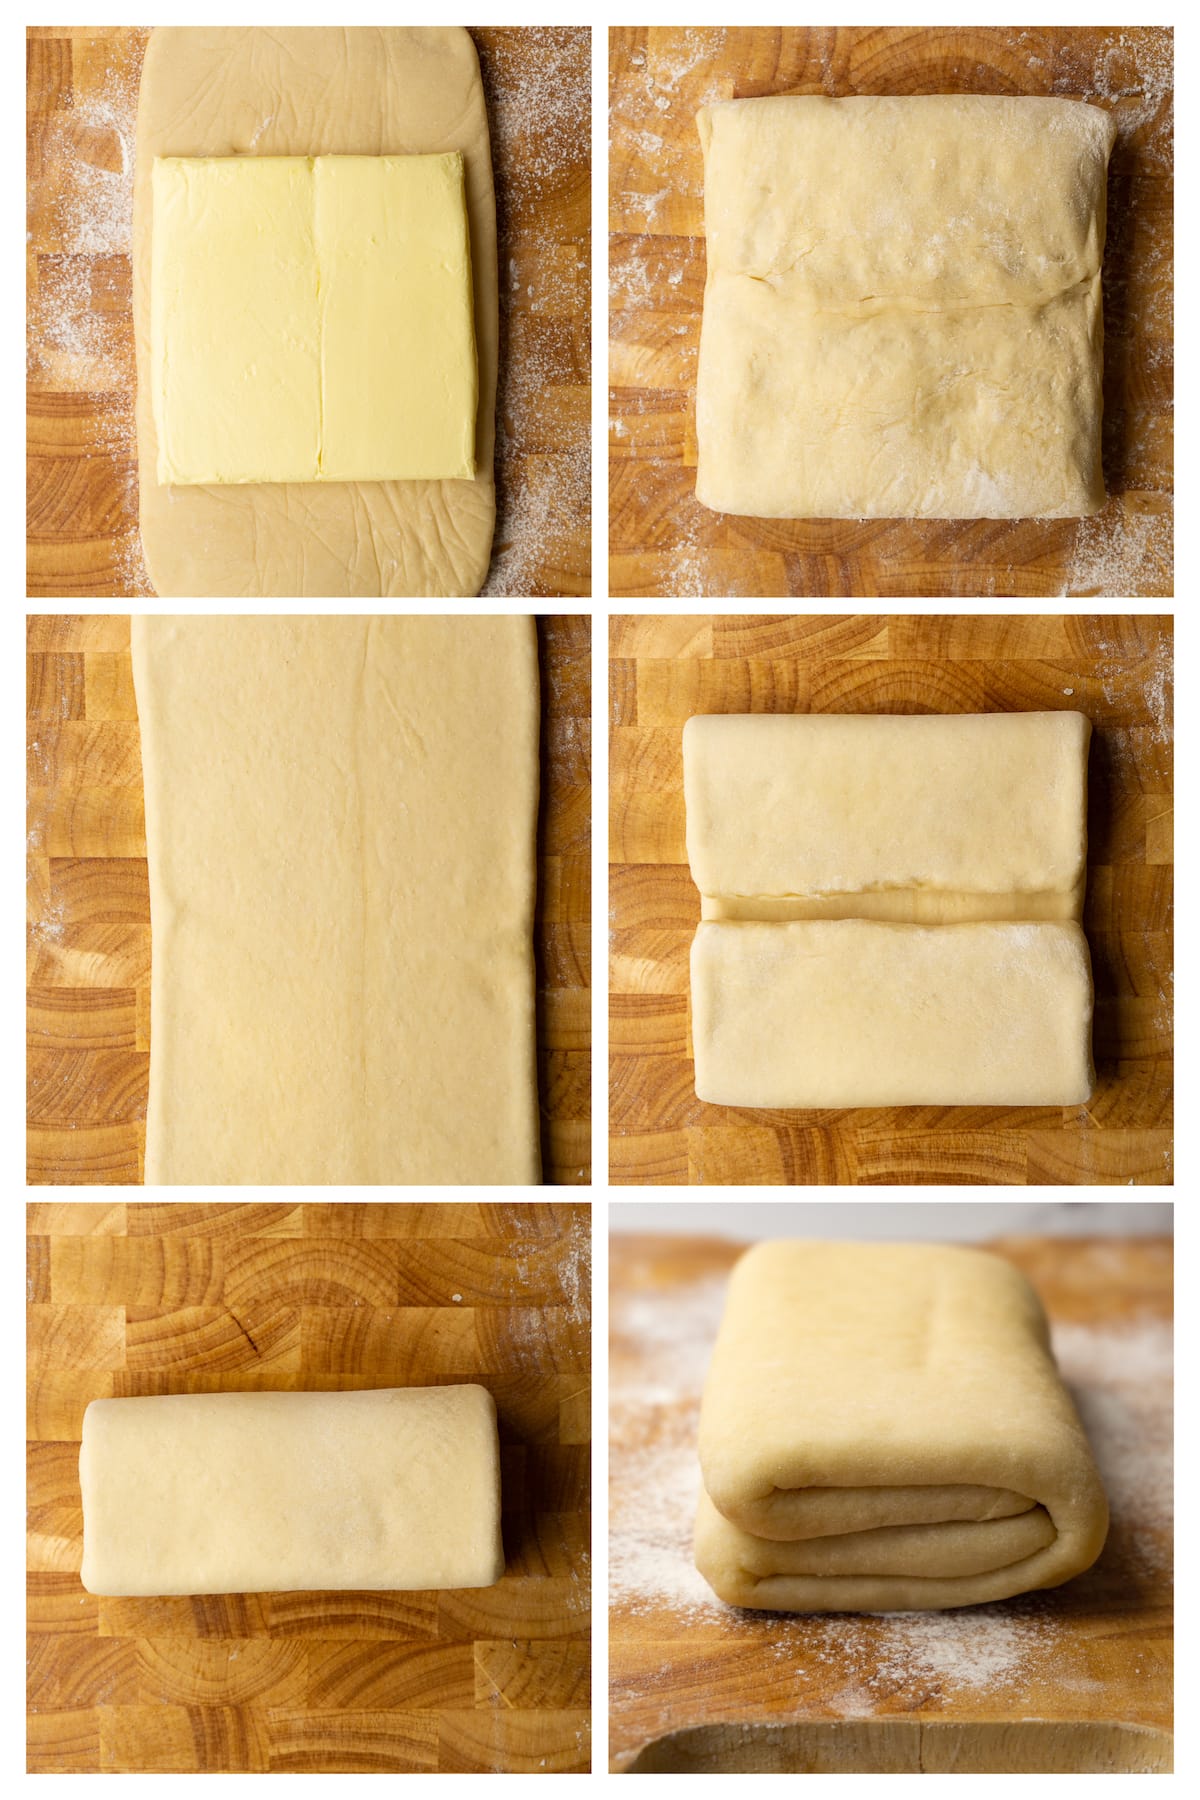 The collage image shows six steps to laminate butter into the dough to make Danish pastry.